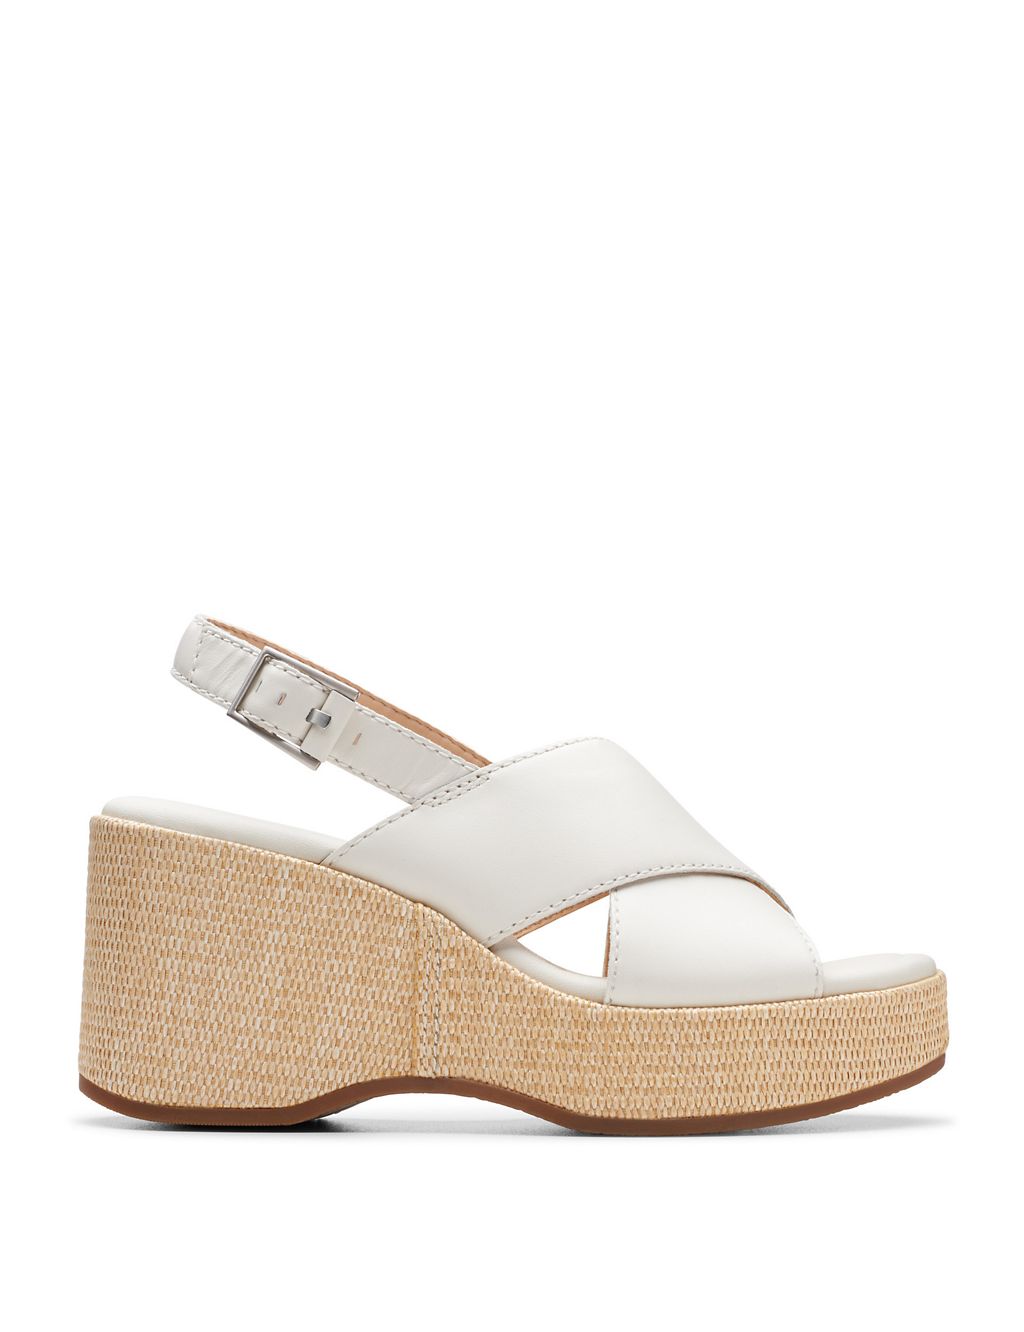 Leather Wedge Sandals 3 of 6